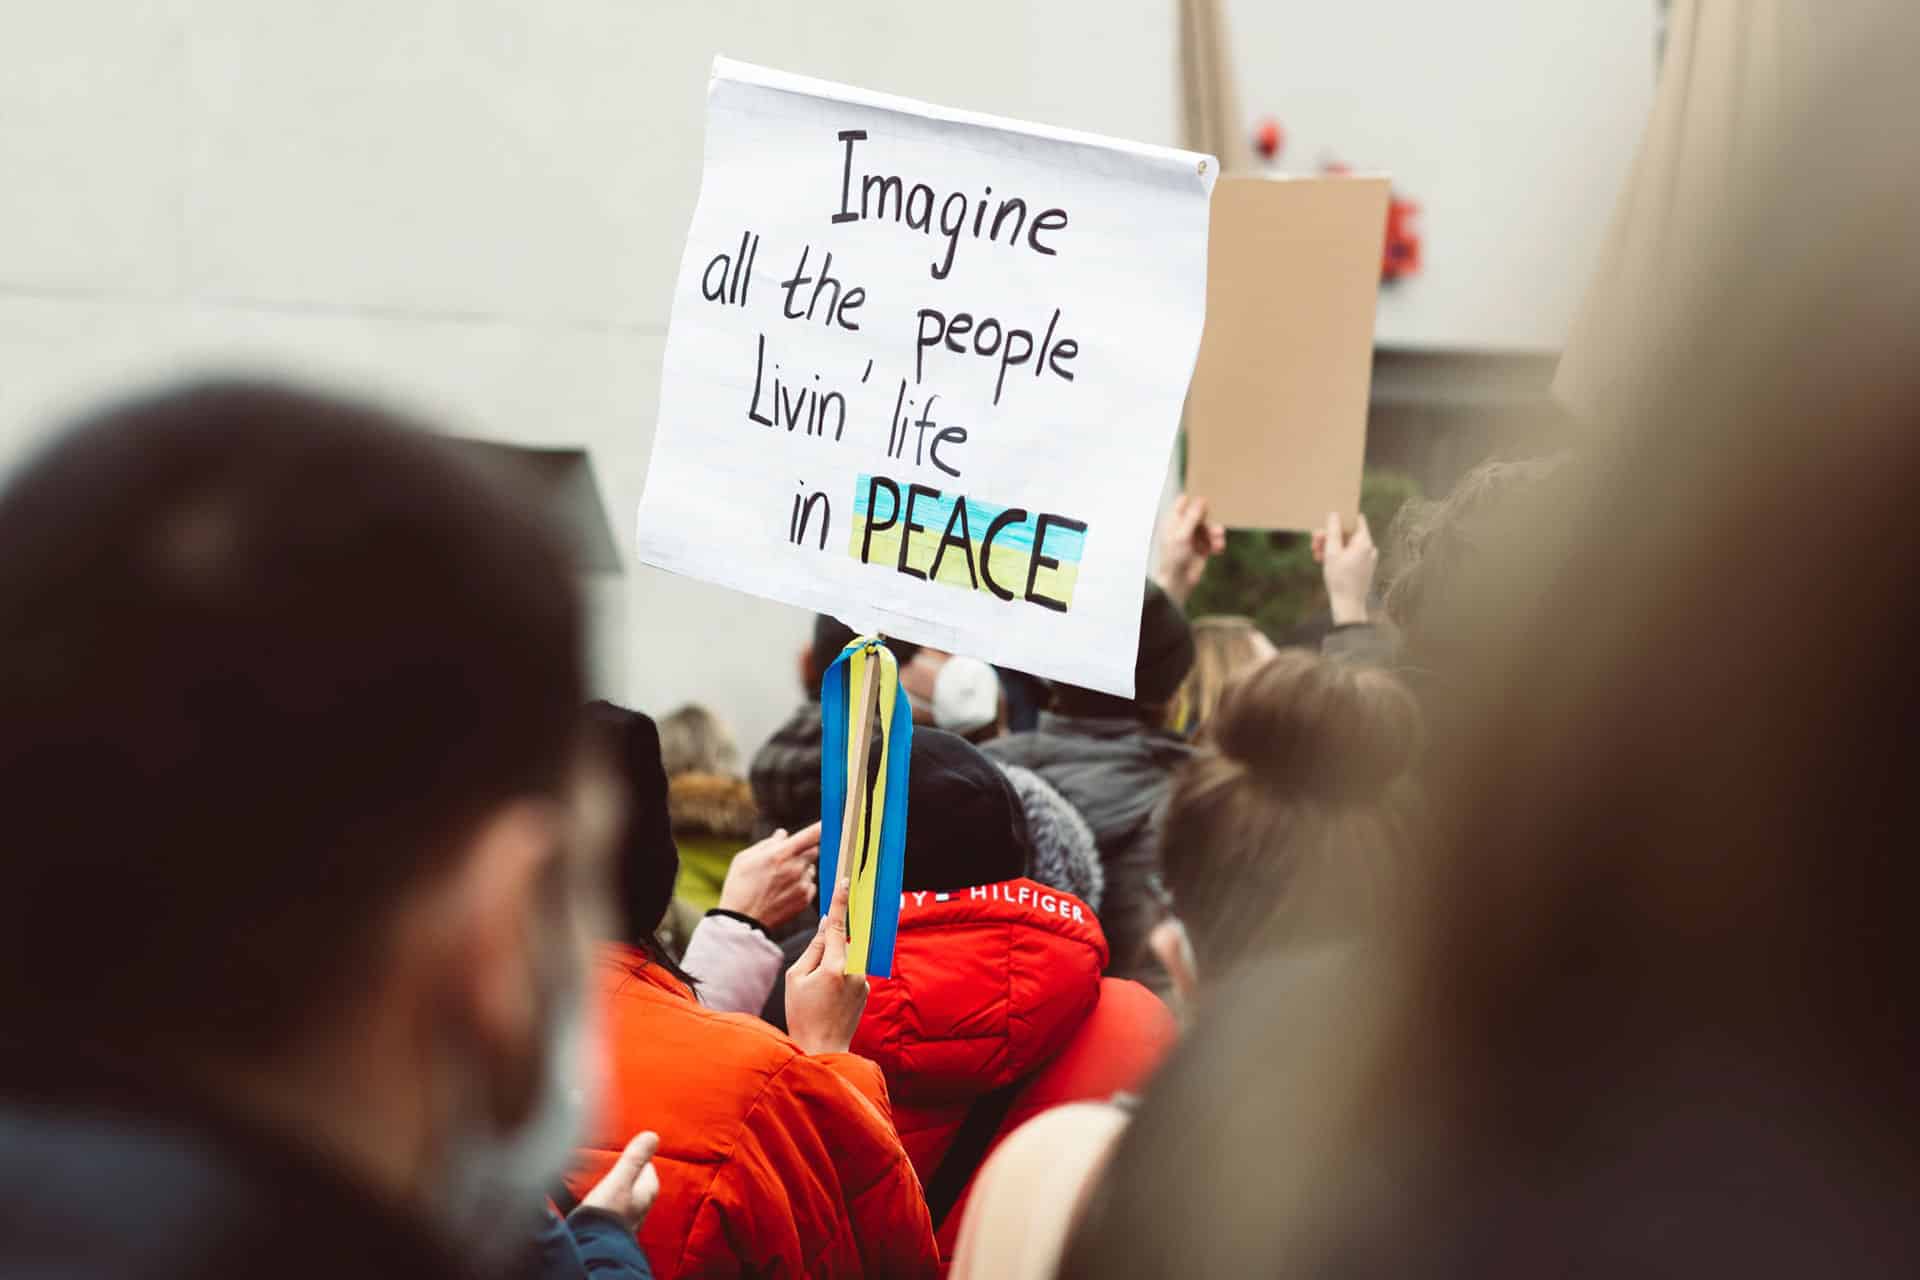 Imagine all the people livin’ life in peace